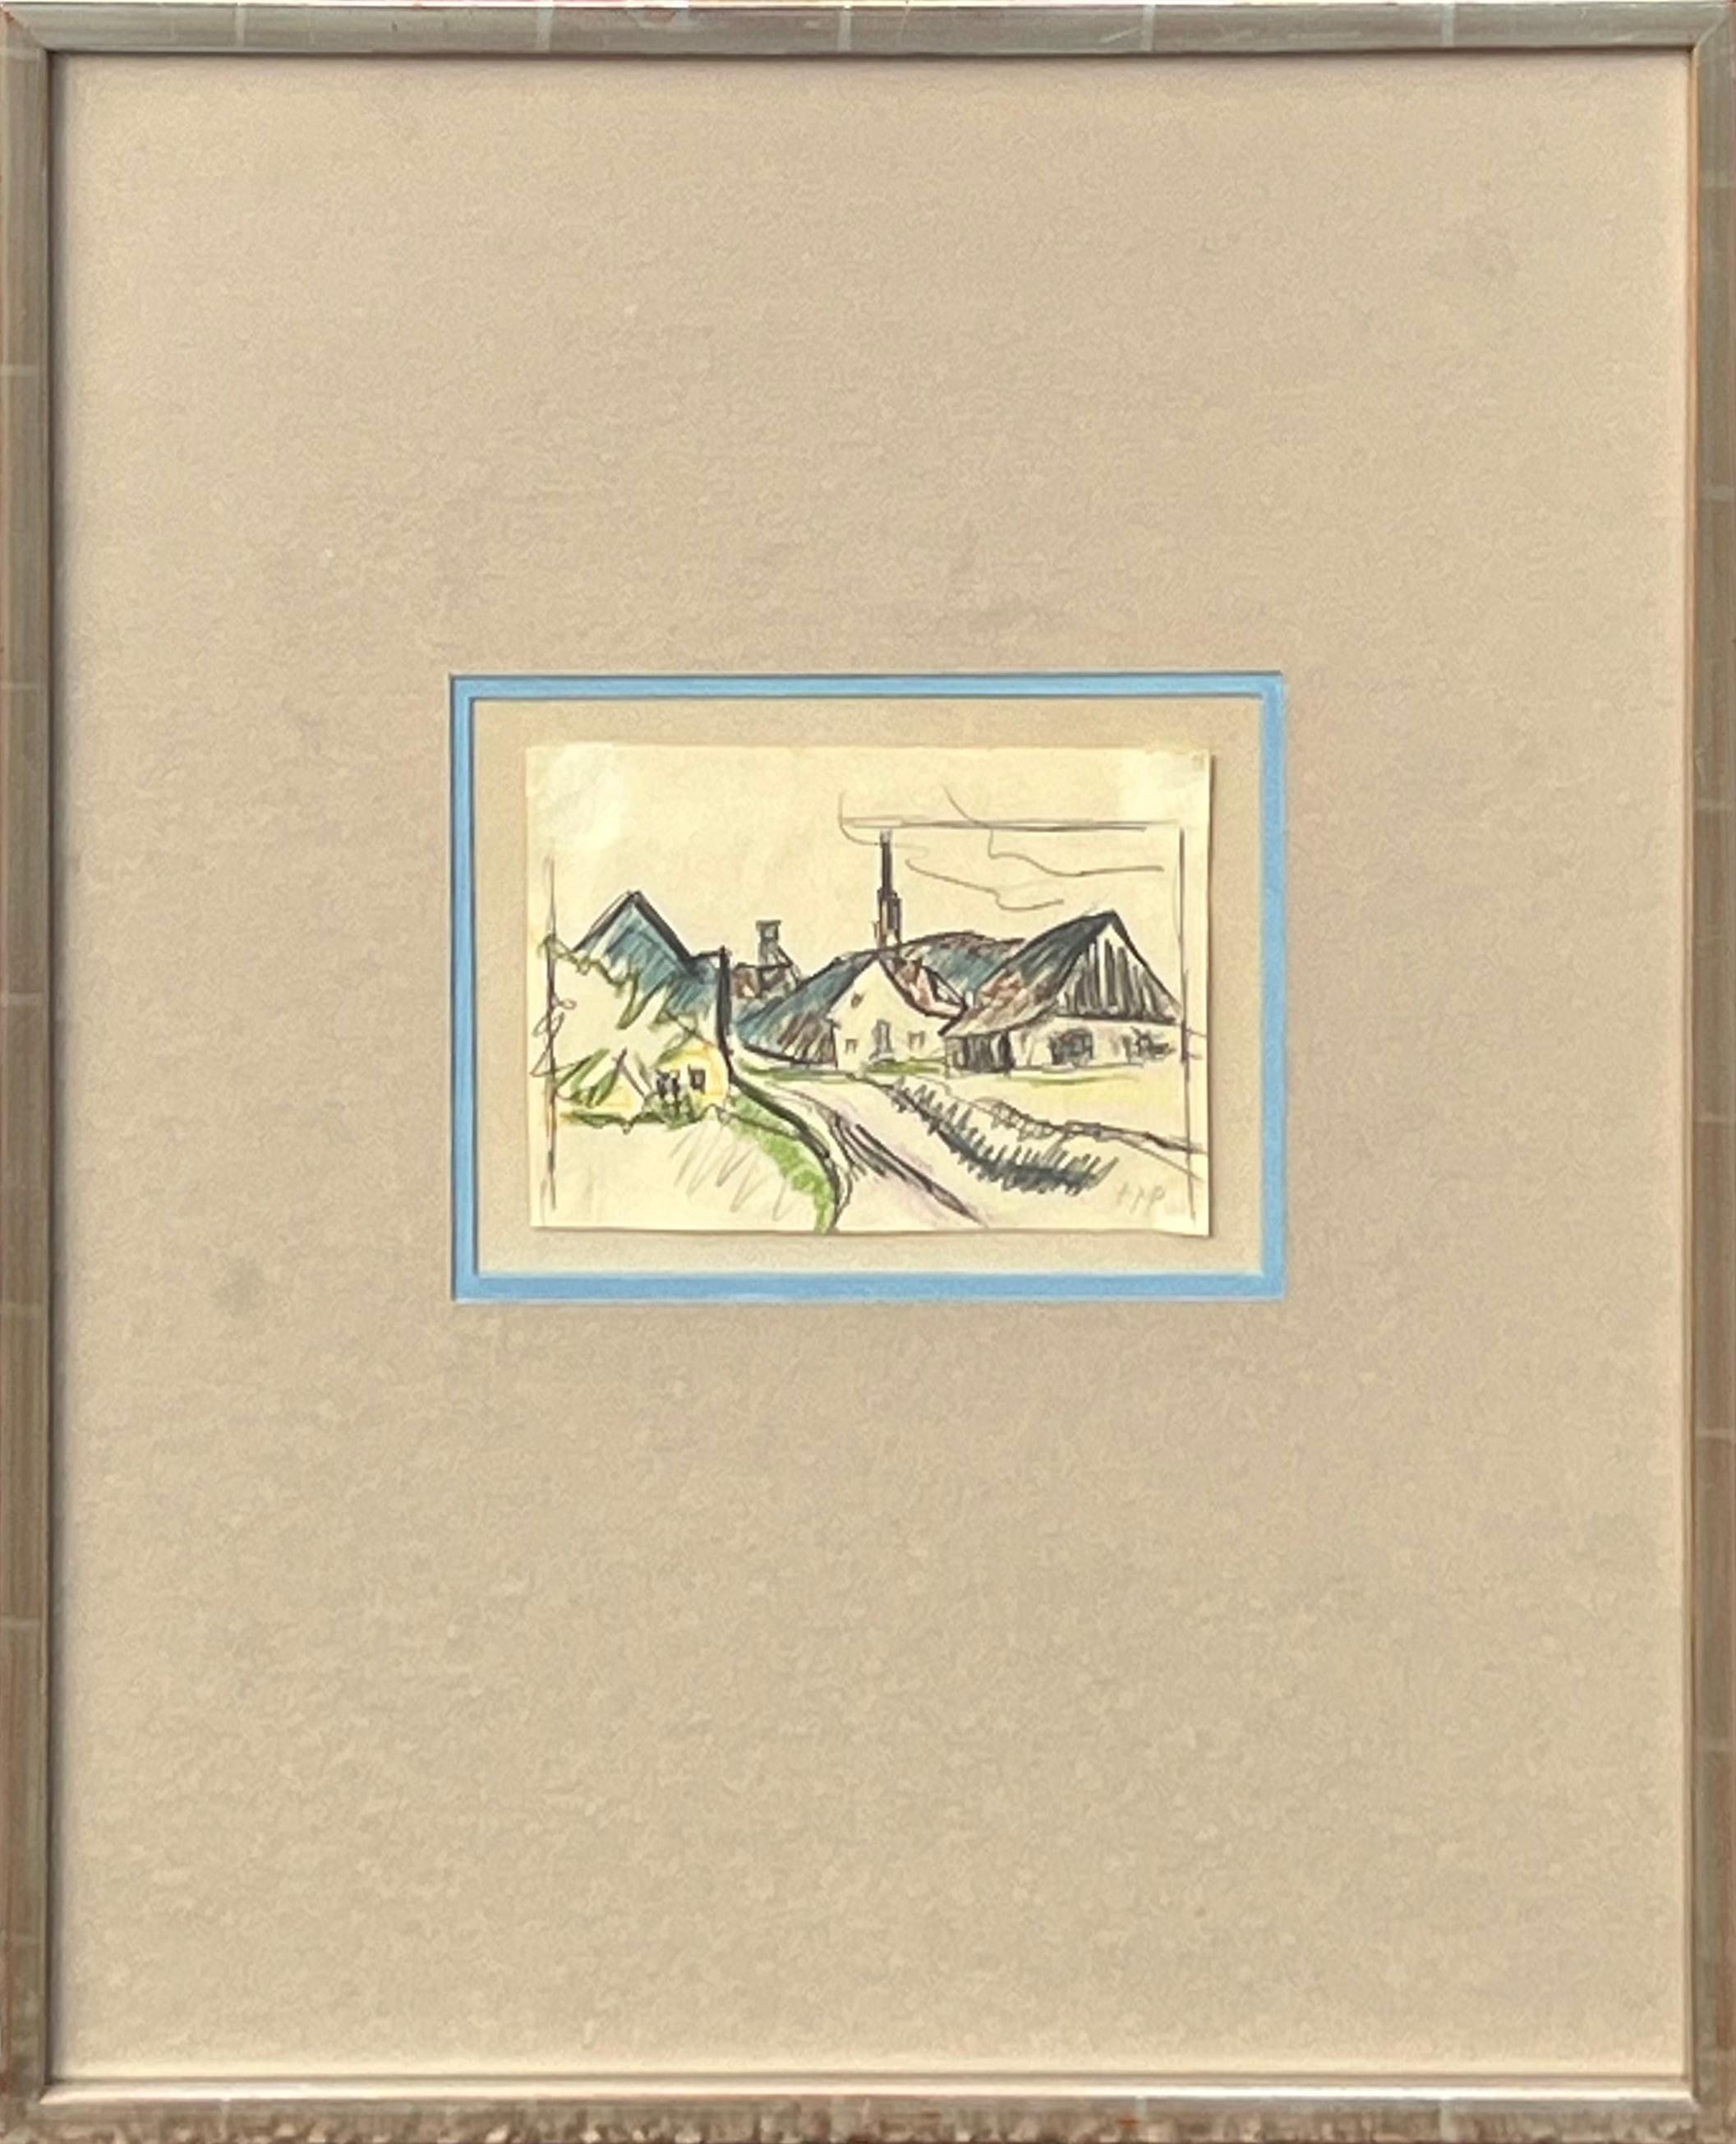 "View of Village" Early Modern Gestural Abstract Landscape Drawing of Houses 